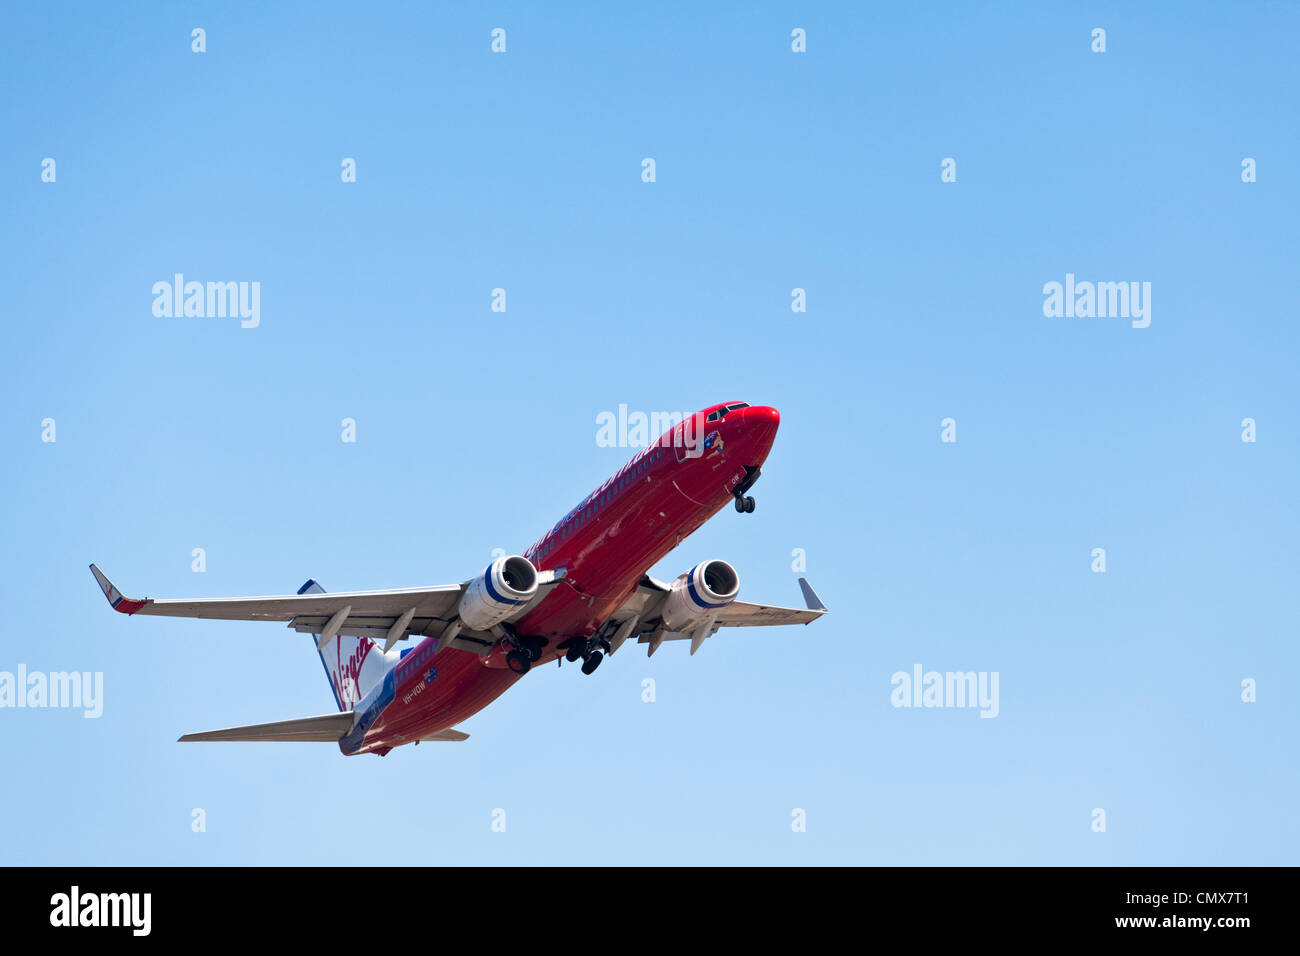 Virgin Blue Airlines aircraft taking off from airport. Hamilton Island, Whitsundays, Queensland, Australia Stock Photo